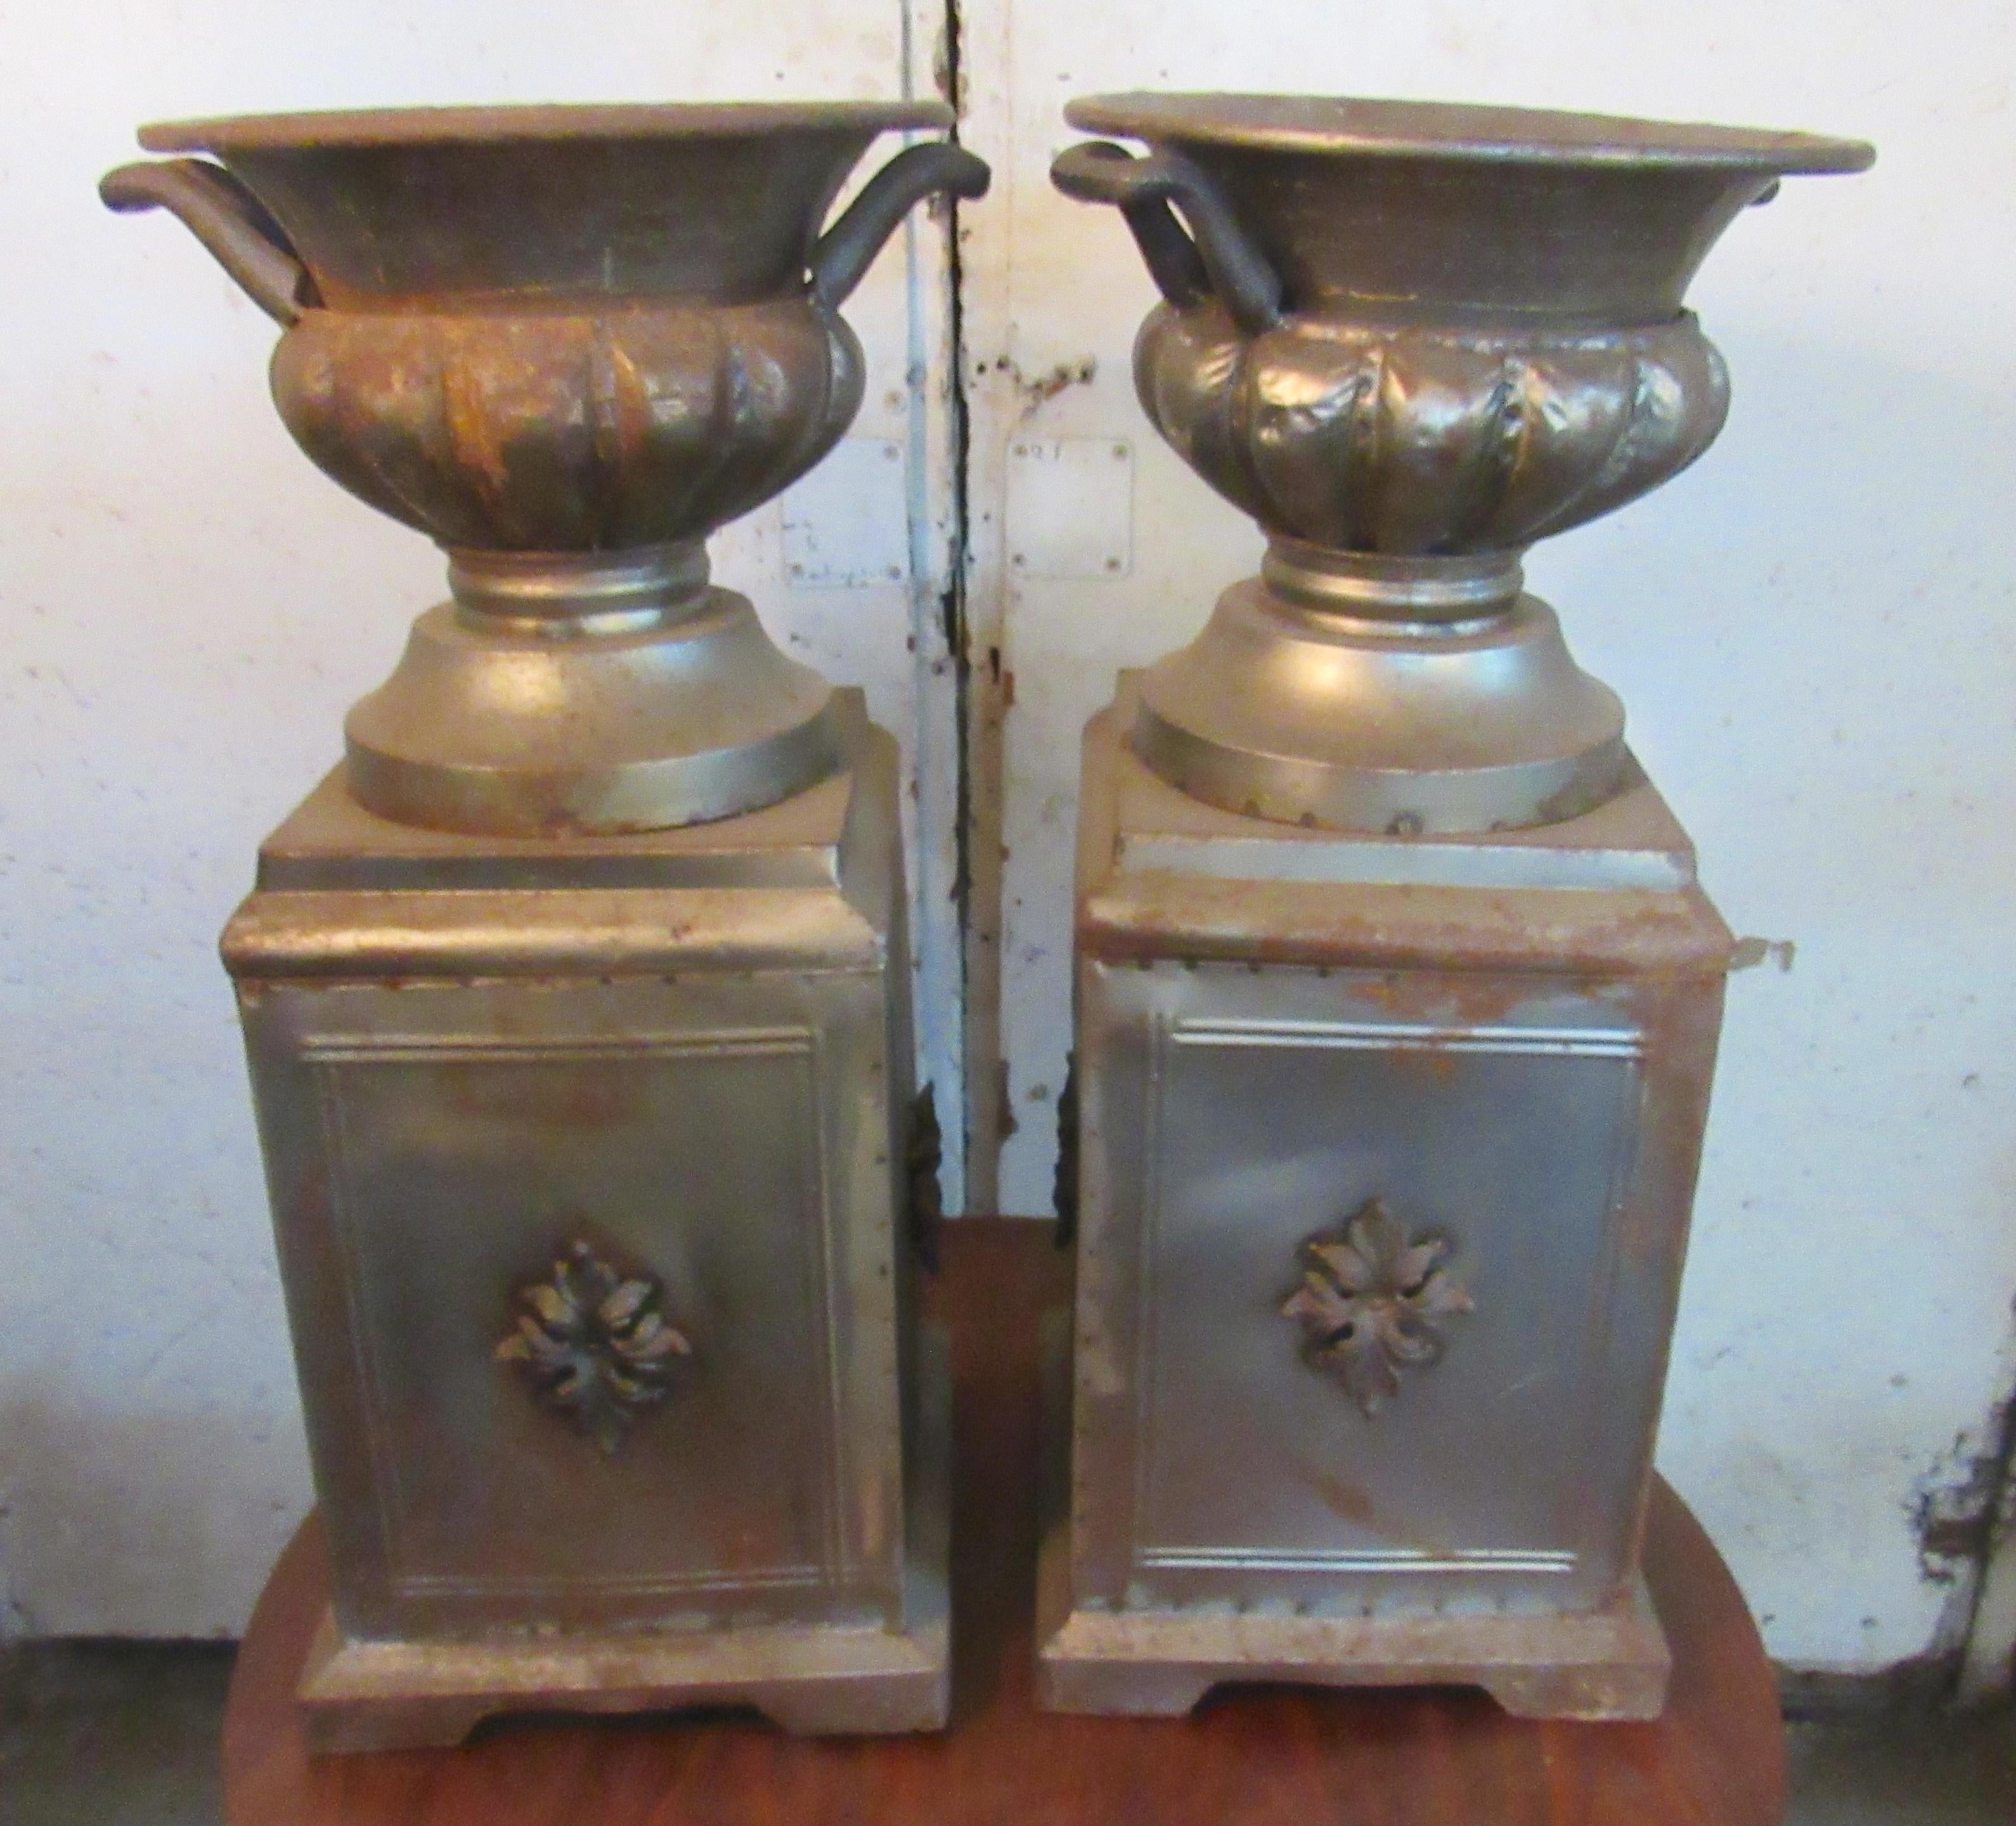 Pair of light weight metal garden urns. Decorative details and handles.
Please confirm location NY or NJ